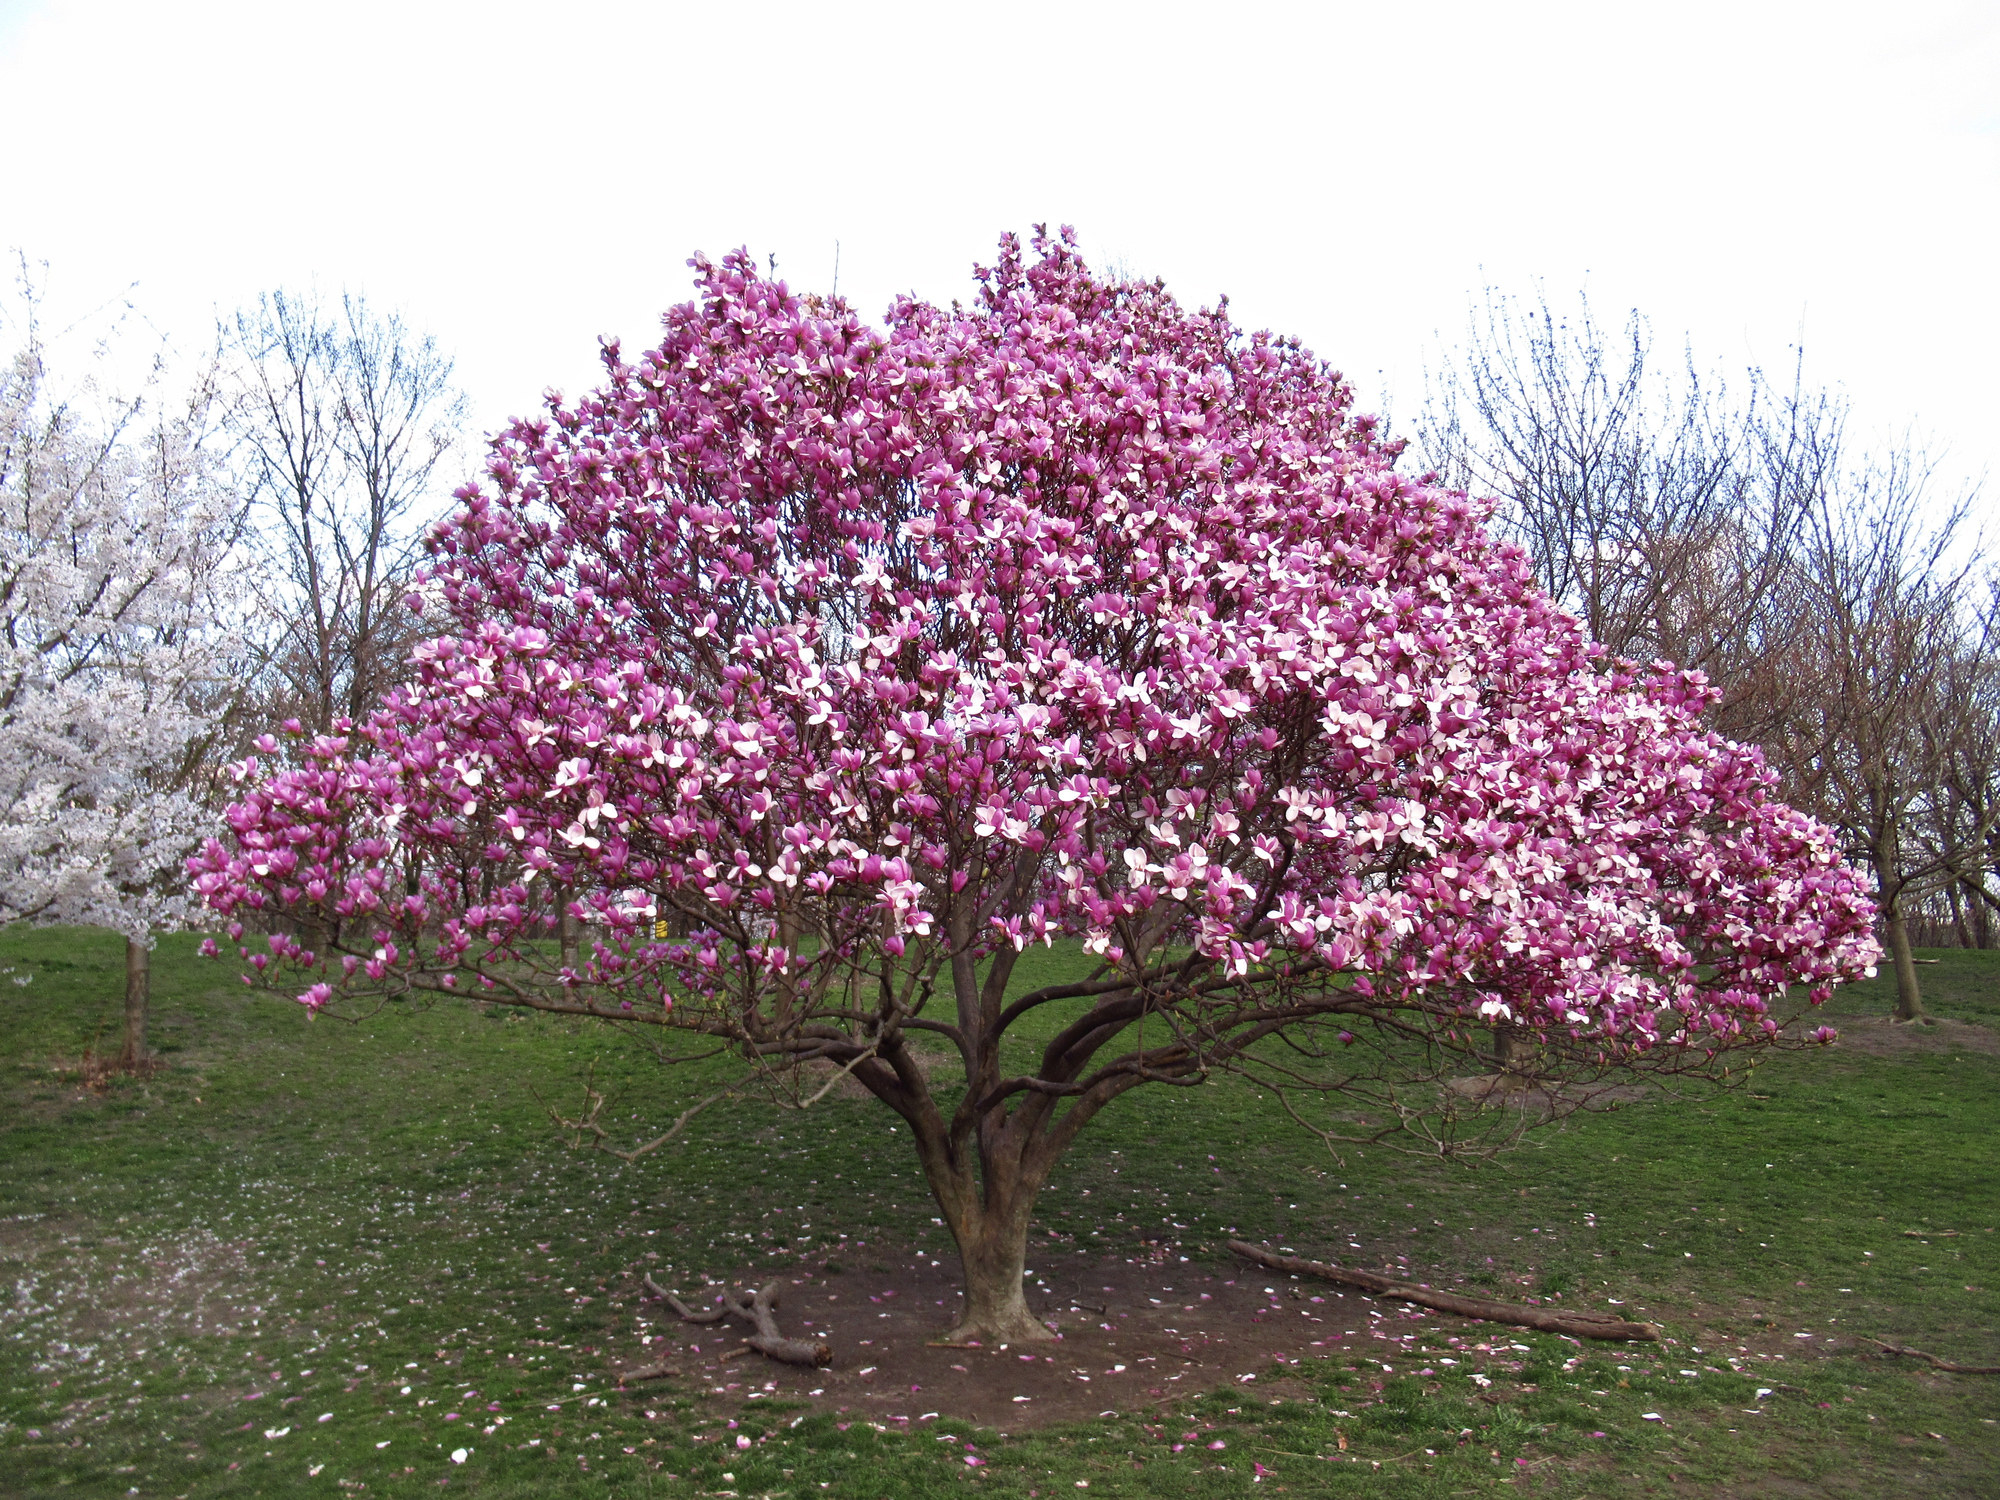 A magolia tree in full bloom